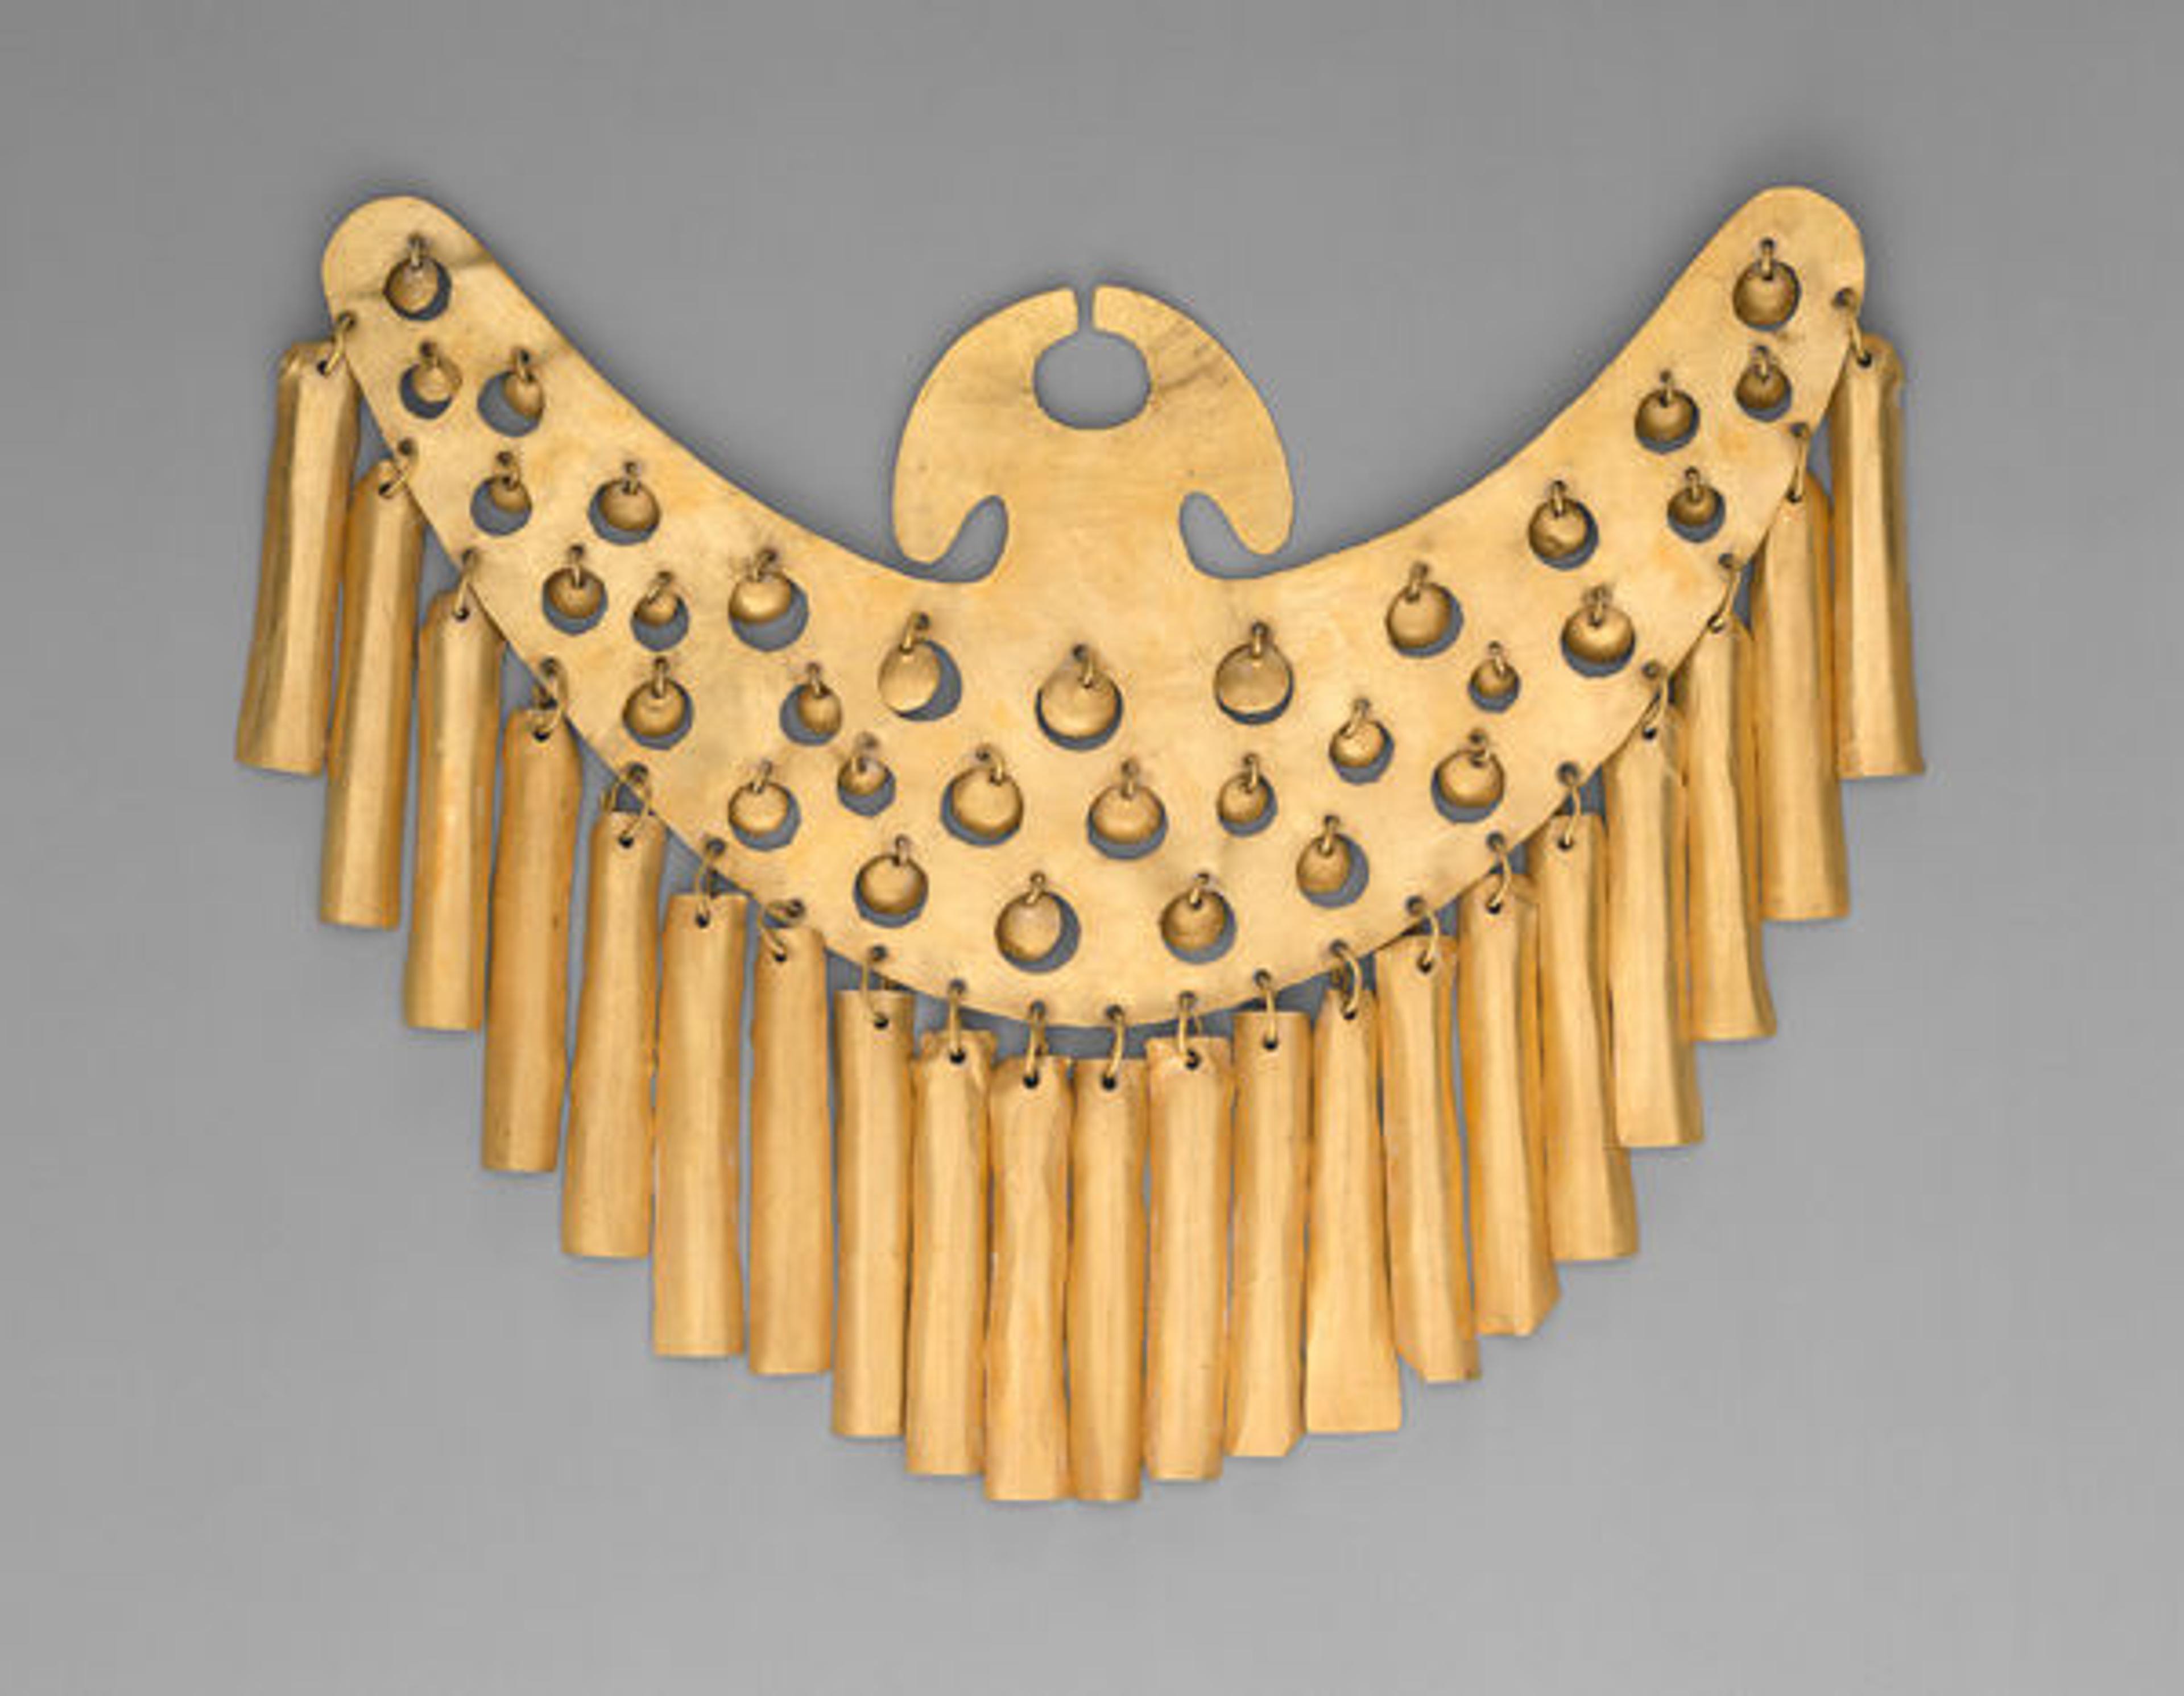 Nose ornament, 1st–7th century. Columbia, Calima (Yotoco). Gold; H. 5 5/16 in. (13.5 cm). The Metropolitan Museum of Art, New York, Gift and Bequest of Alice K. Bache, 1966, 1977 (66.196.23)